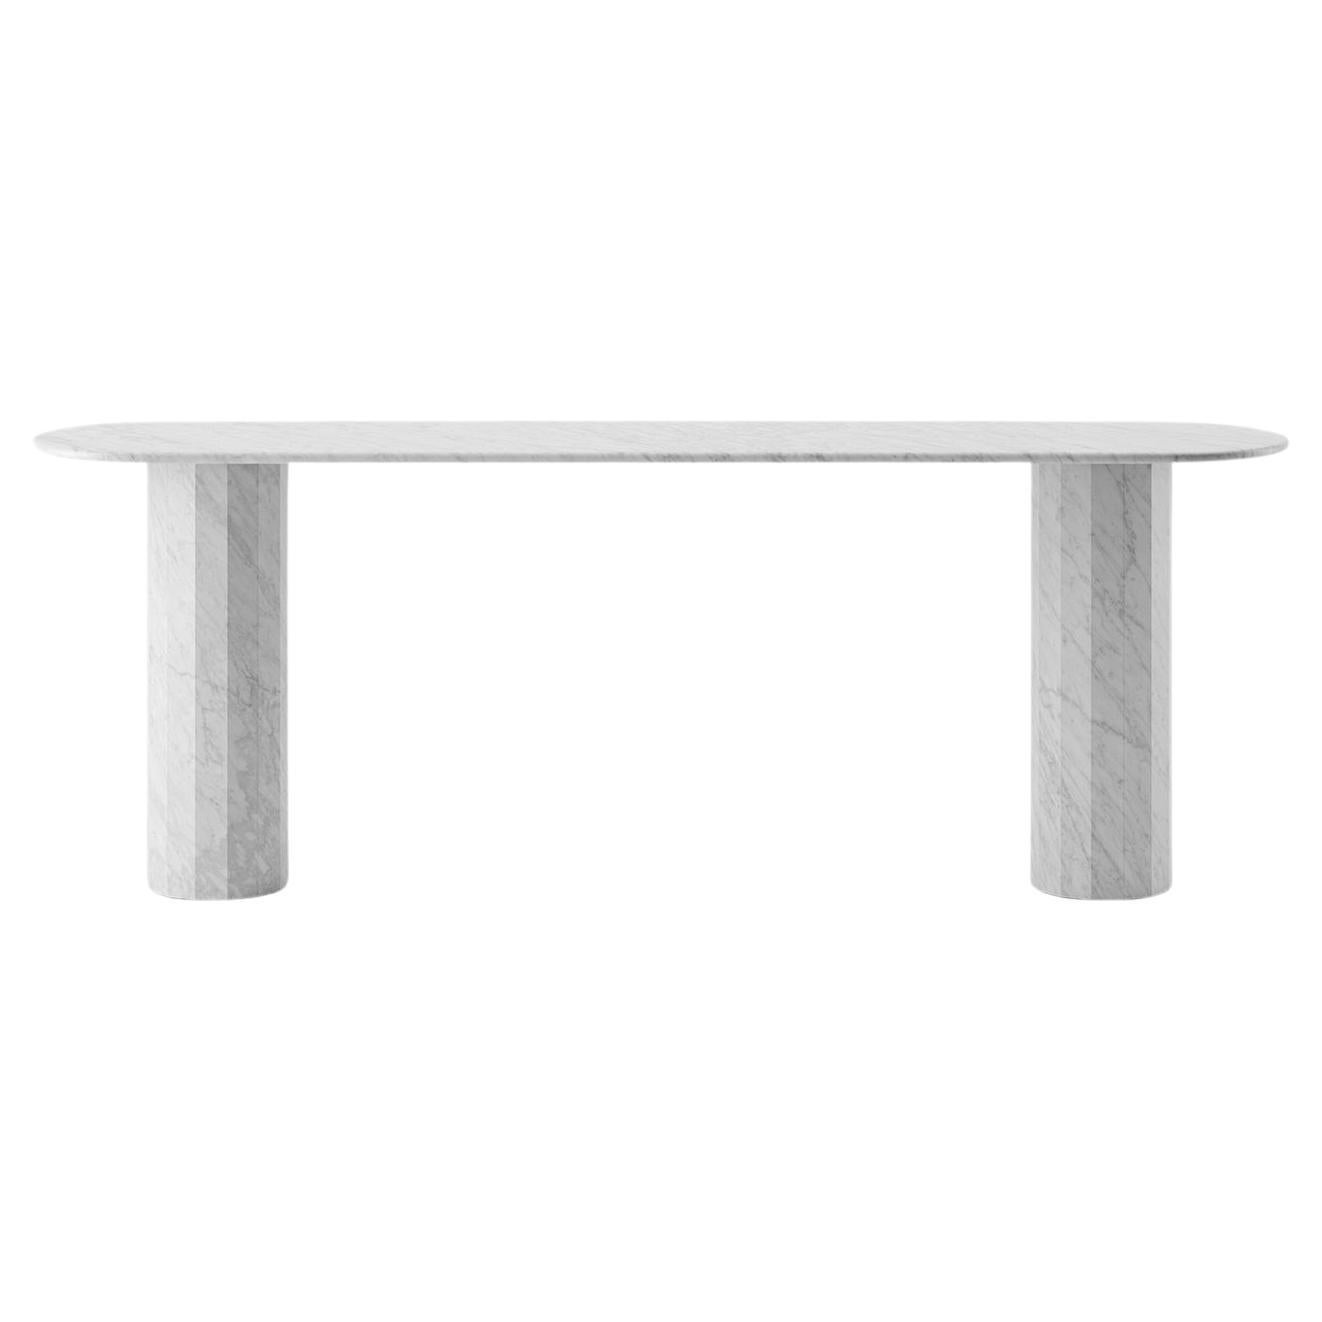 Ashby Console Handcrafted in Bianco Carrara Marble by Lemon